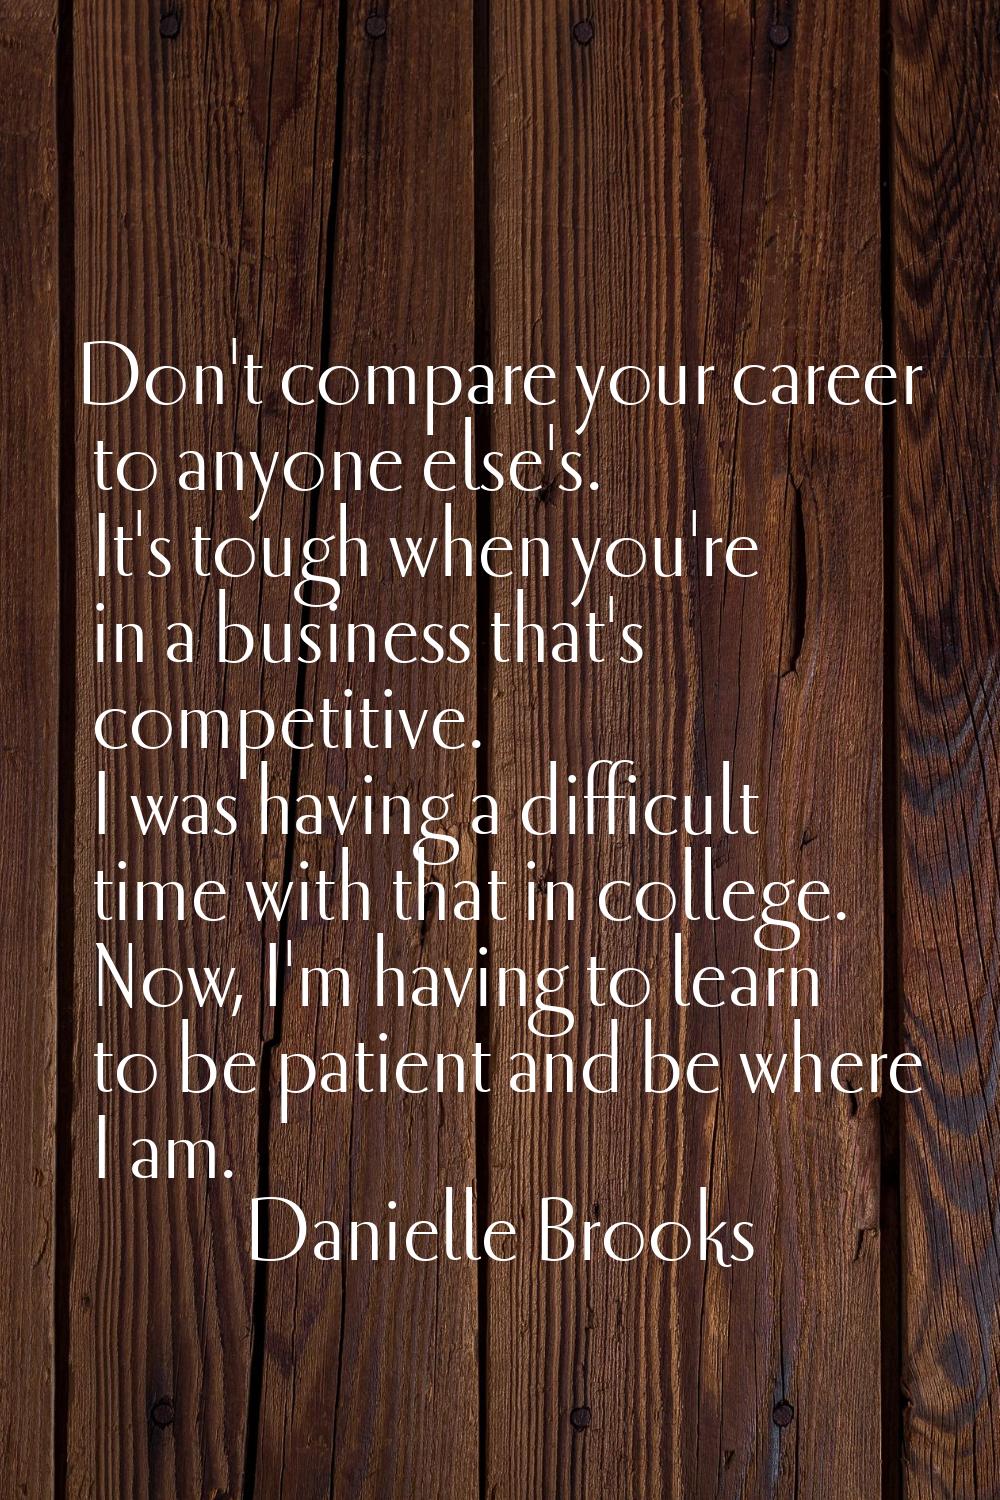 Don't compare your career to anyone else's. It's tough when you're in a business that's competitive